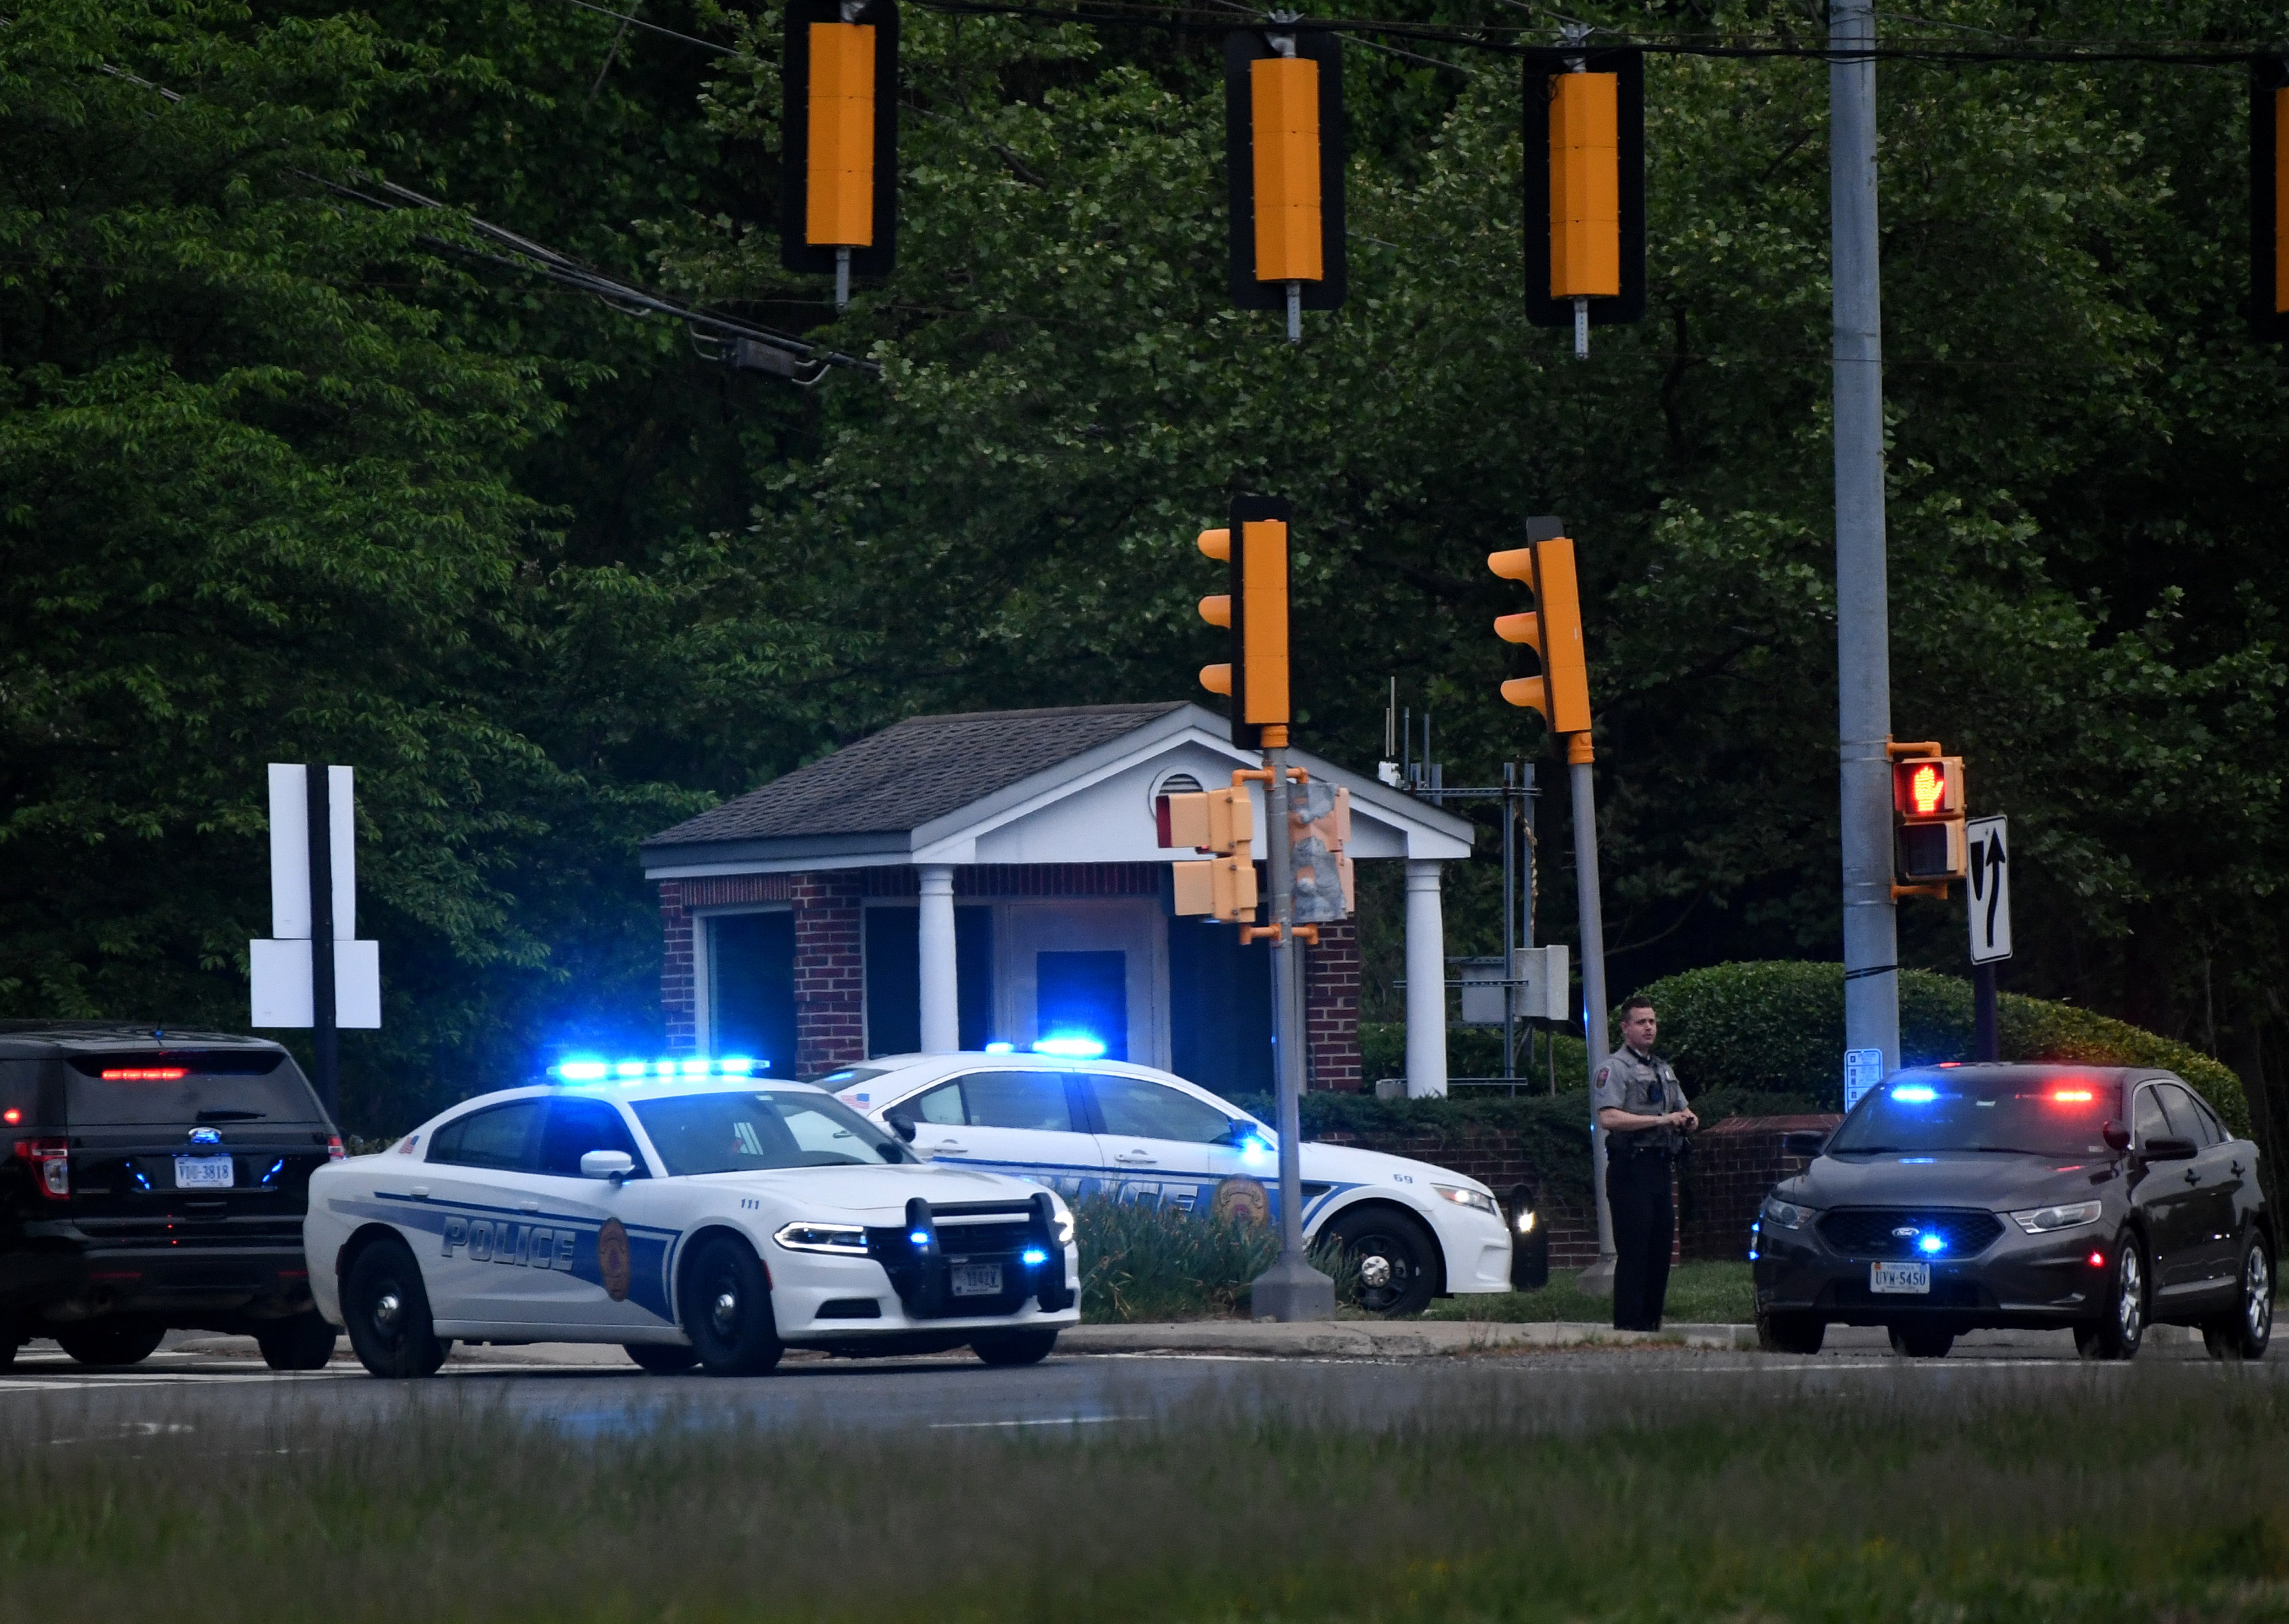 Police cars are seen outside the CIA headquarters's gate after an attempted intrusion earlier in the day in Langley, Virginia, on May 3, 2021